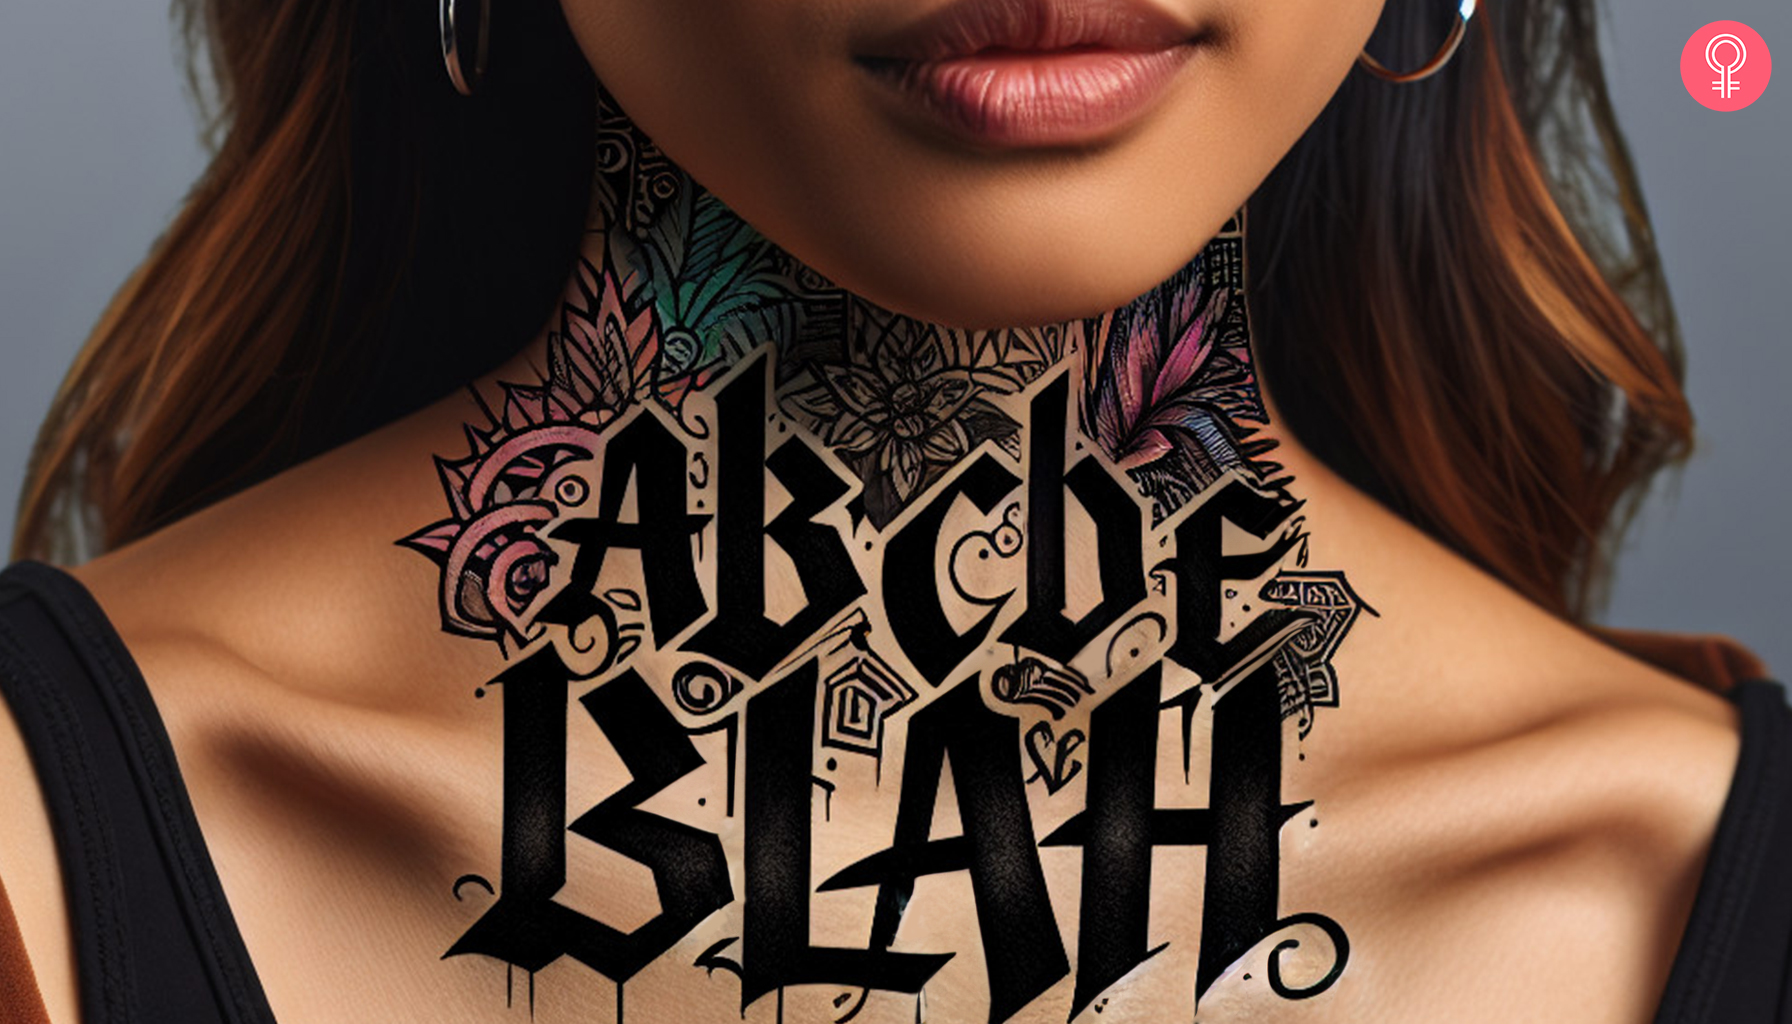 A graffiti tattoo on a woman’s back with the lettering ‘ABCDE blah’